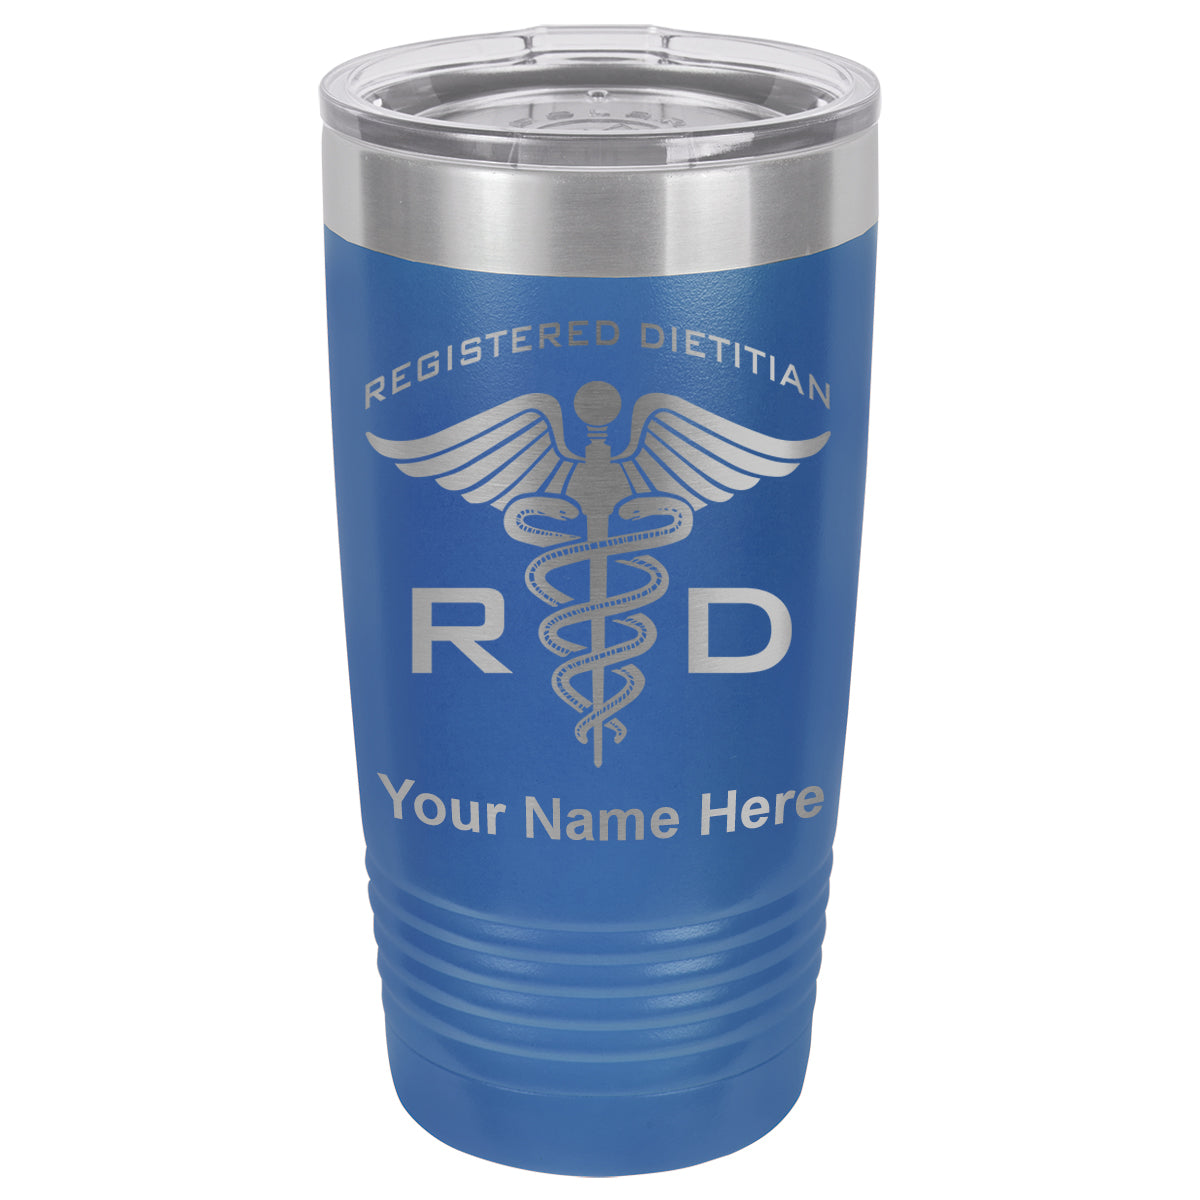 20oz Vacuum Insulated Tumbler Mug, RD Registered Dietitian, Personalized Engraving Included